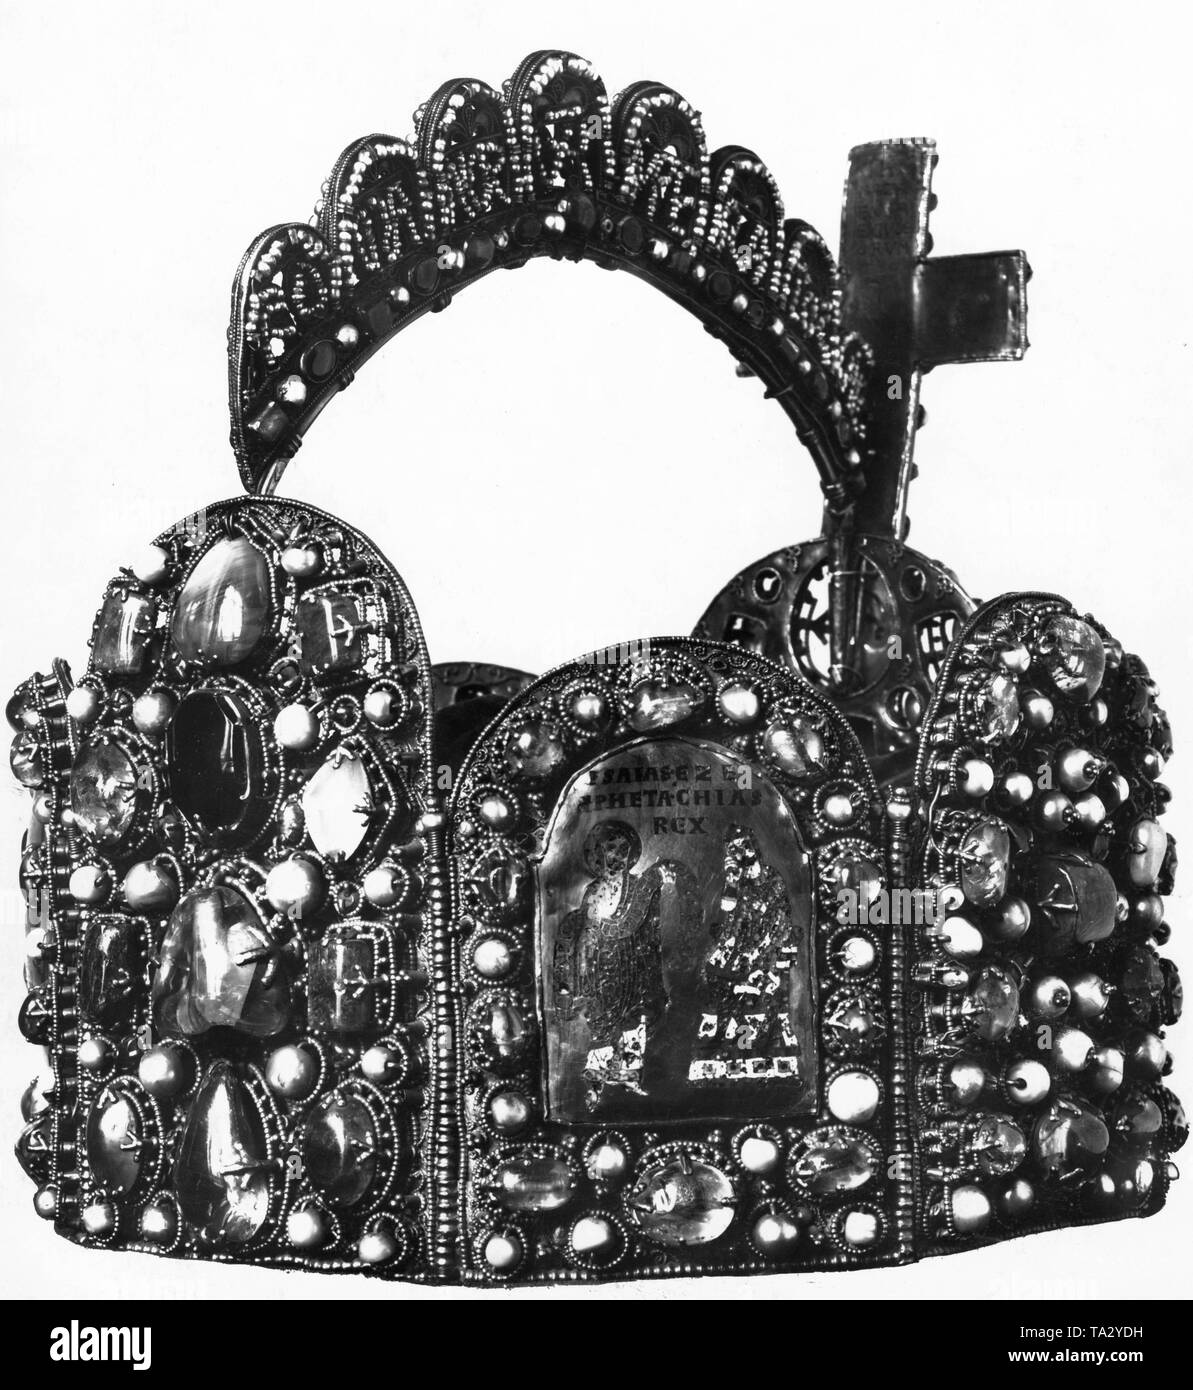 The German Imperial Crown was made probably for the coronation of Otto the Great in the 10th century on Reichenau. The arch was added under Conrad II (1024-1039). Stock Photo